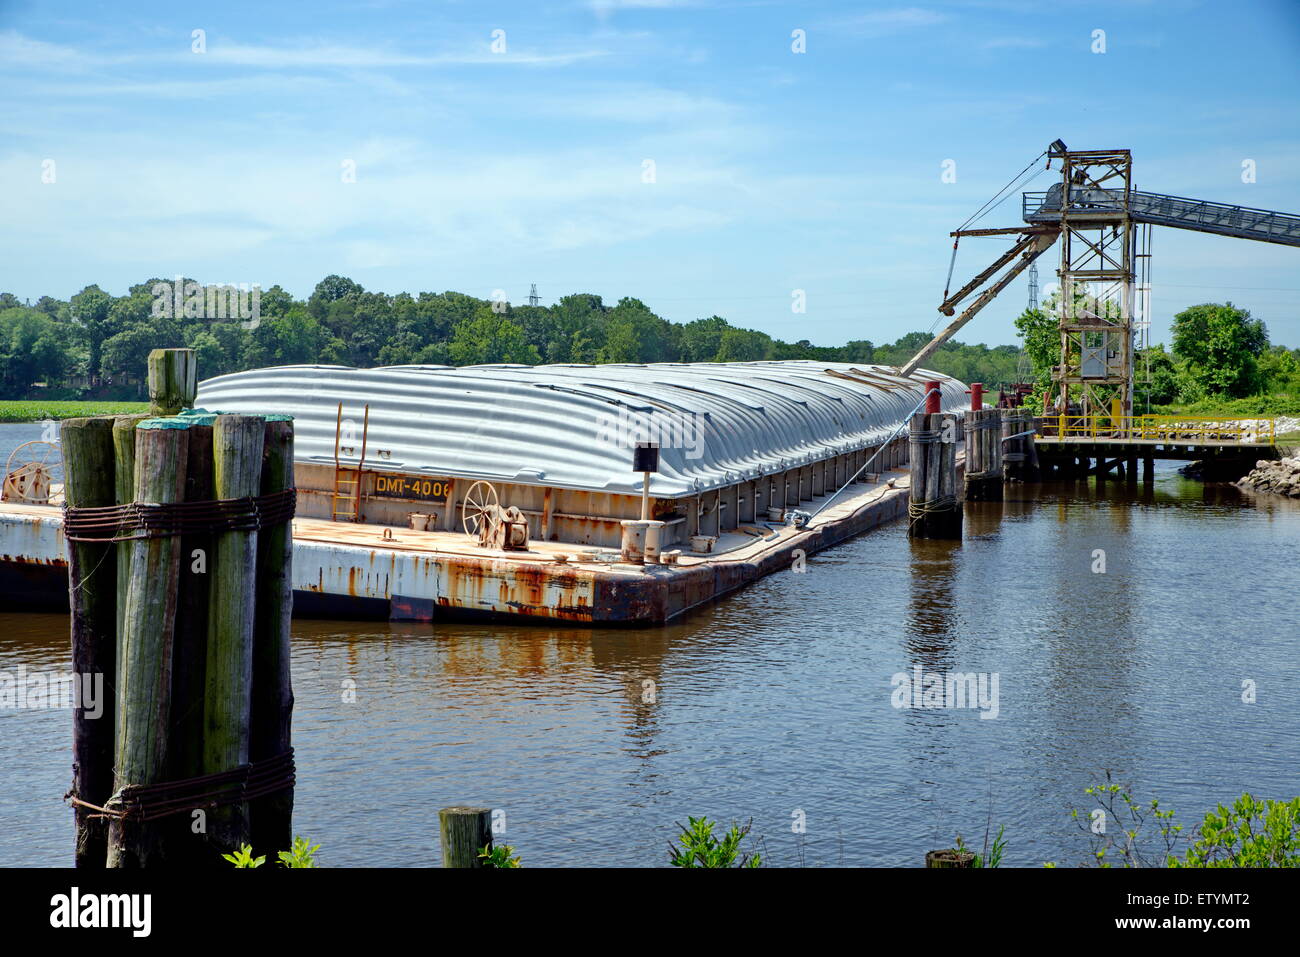 A loaded, covered grain barge sits near a dock along the Nanticoke River in Seaford, Delaware. Stock Photo